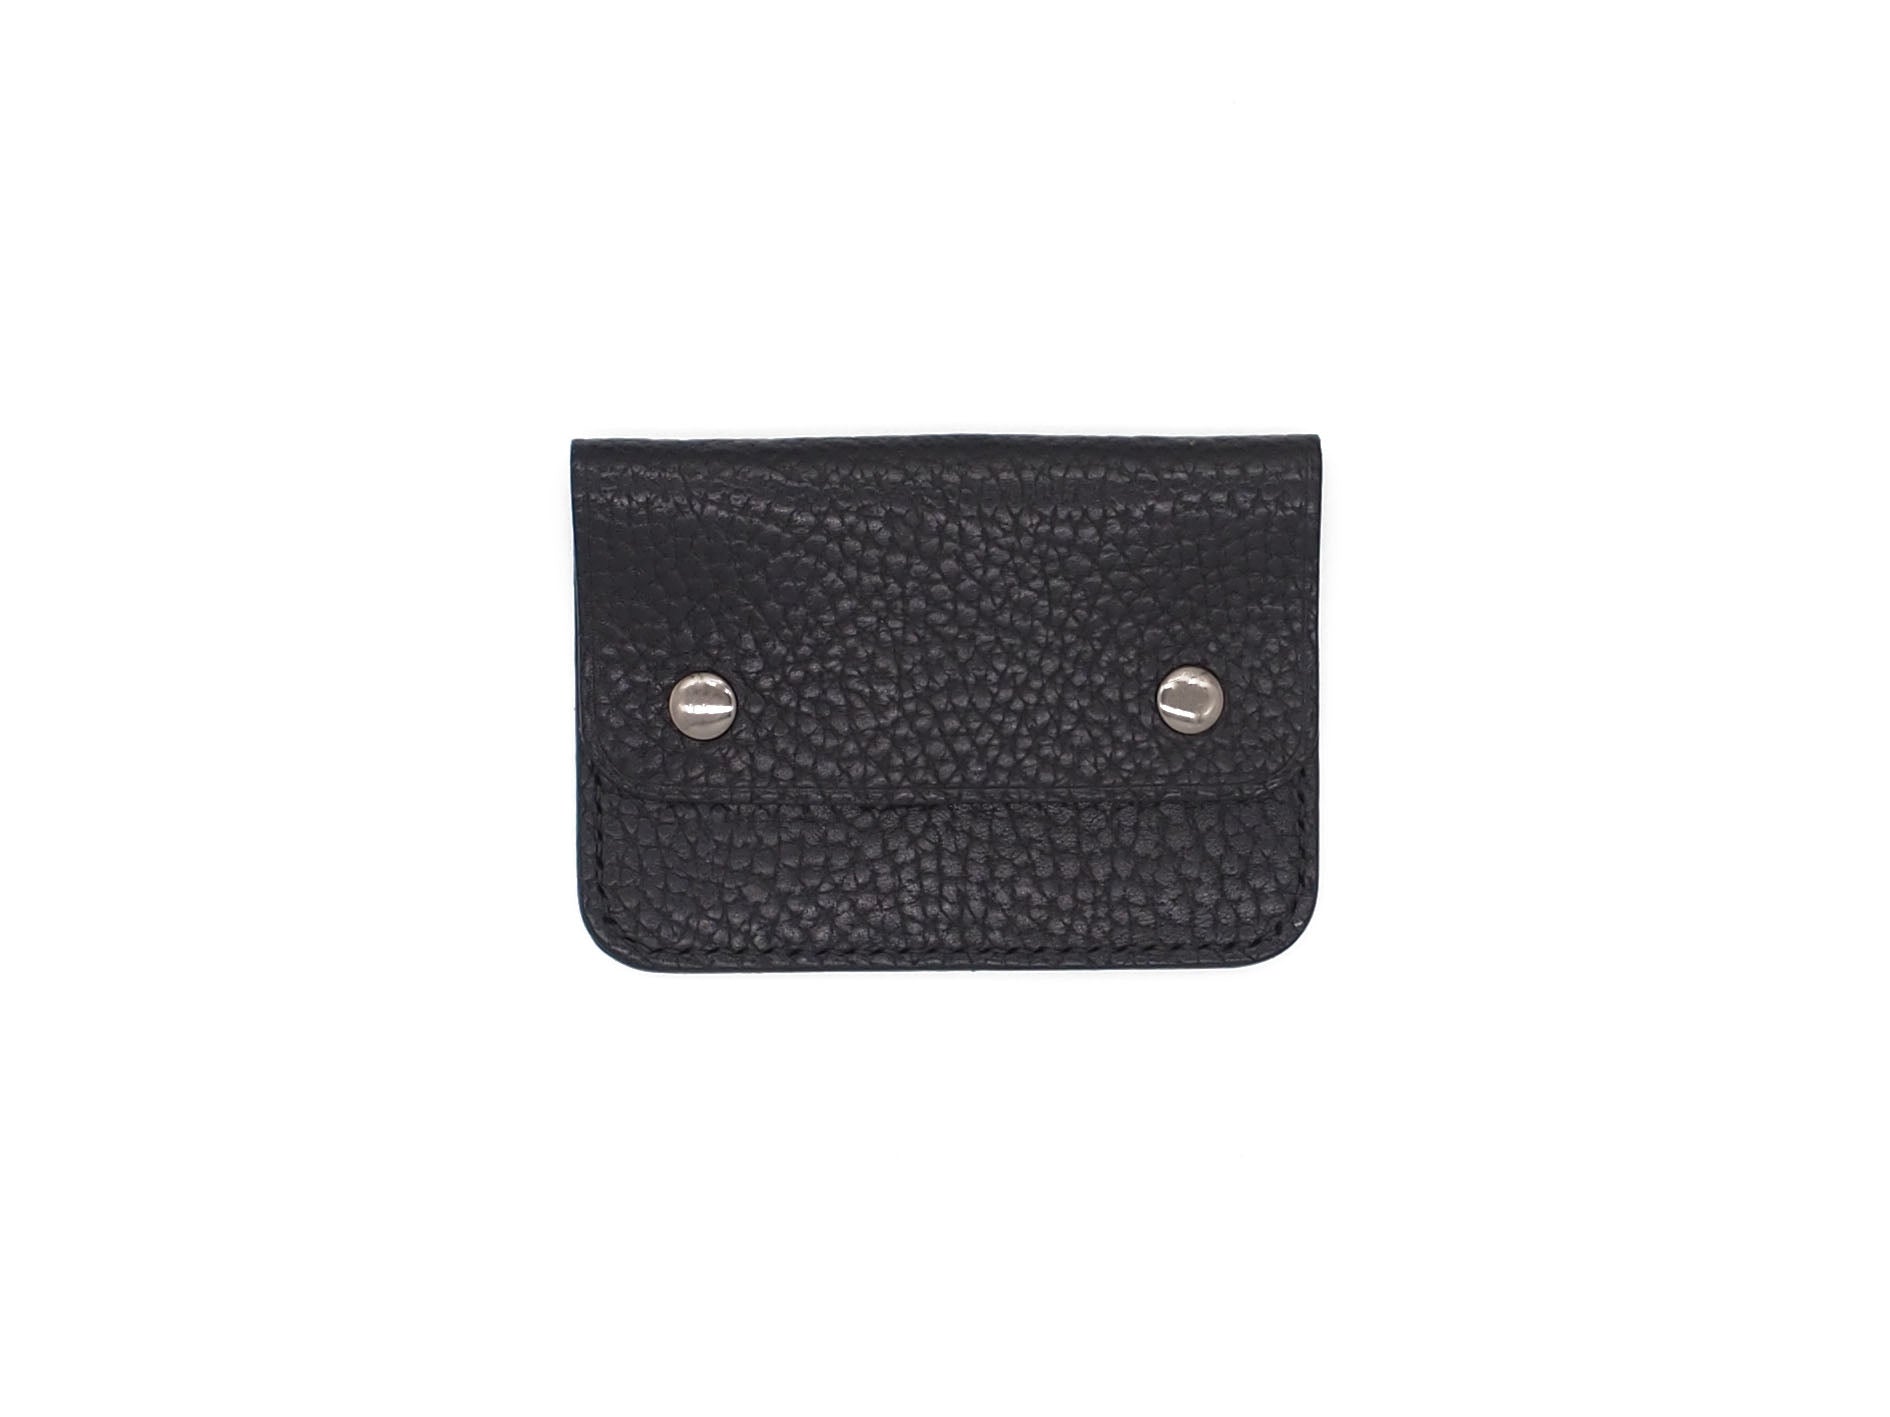 Utility Pocket - Snap Pouch Wallet In Pebbled Black